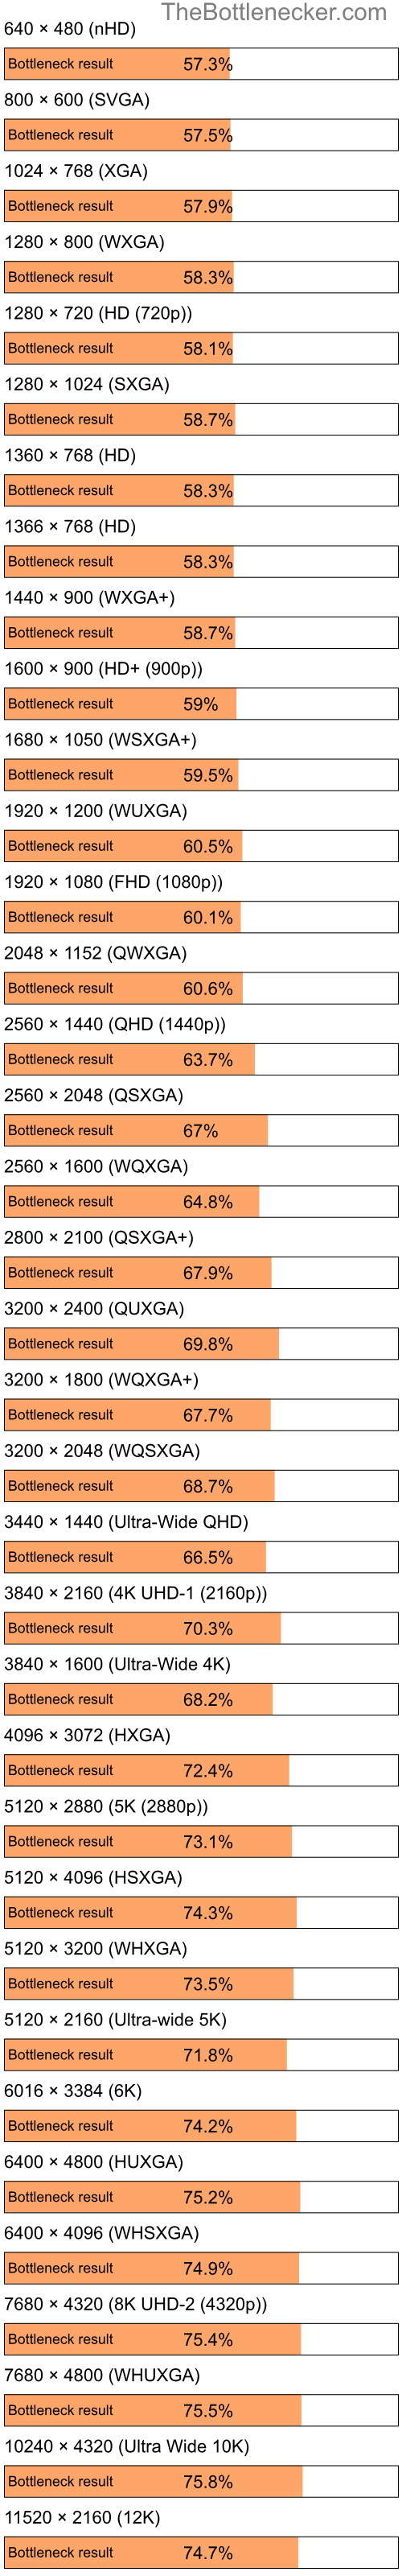 Bottleneck results by resolution for Intel Atom N270 and AMD Radeon HD 3200 in Processor Intense Tasks